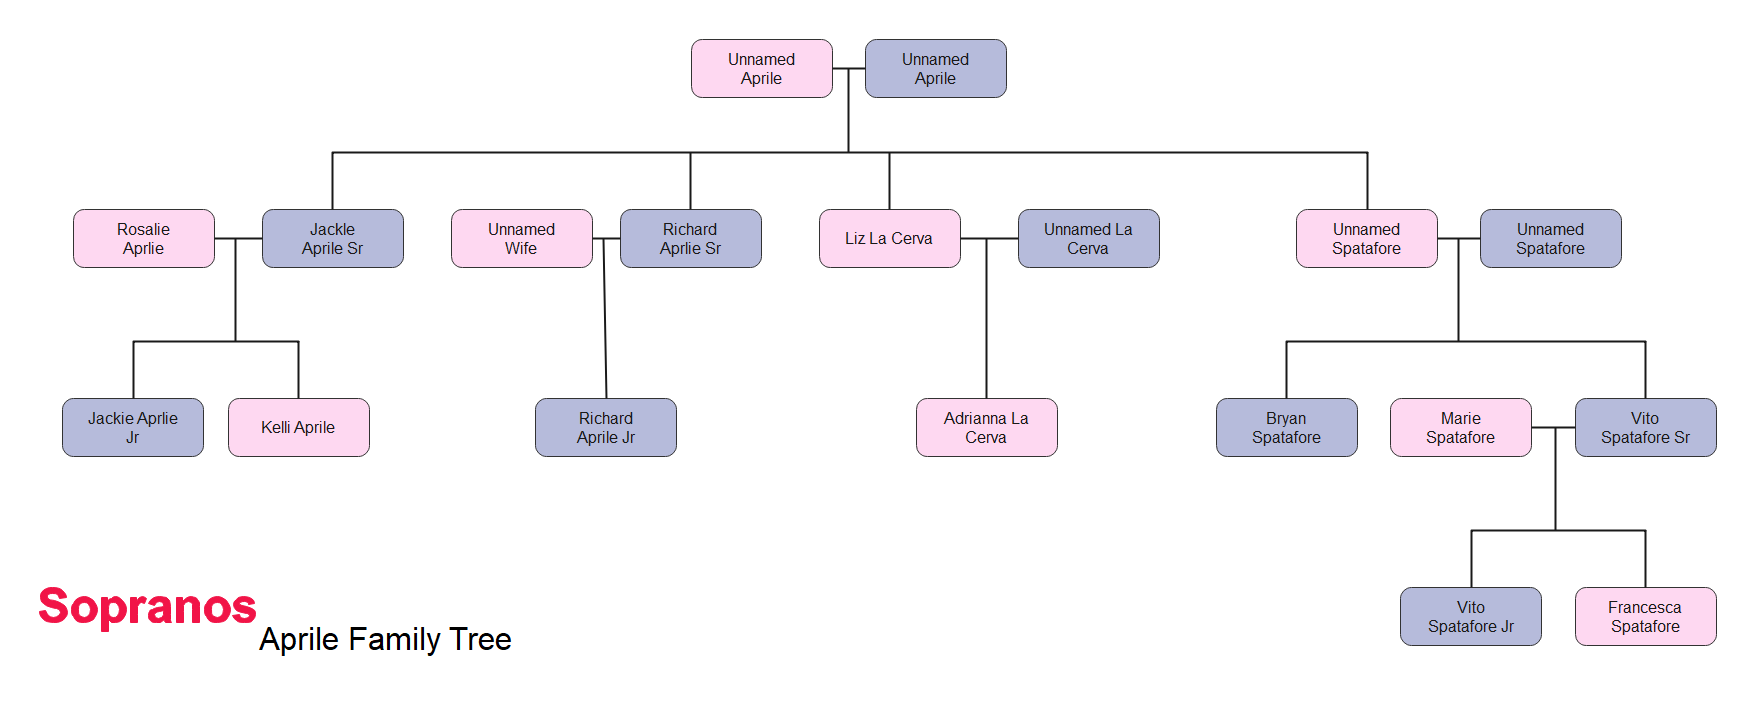 The Aprile Family Tree